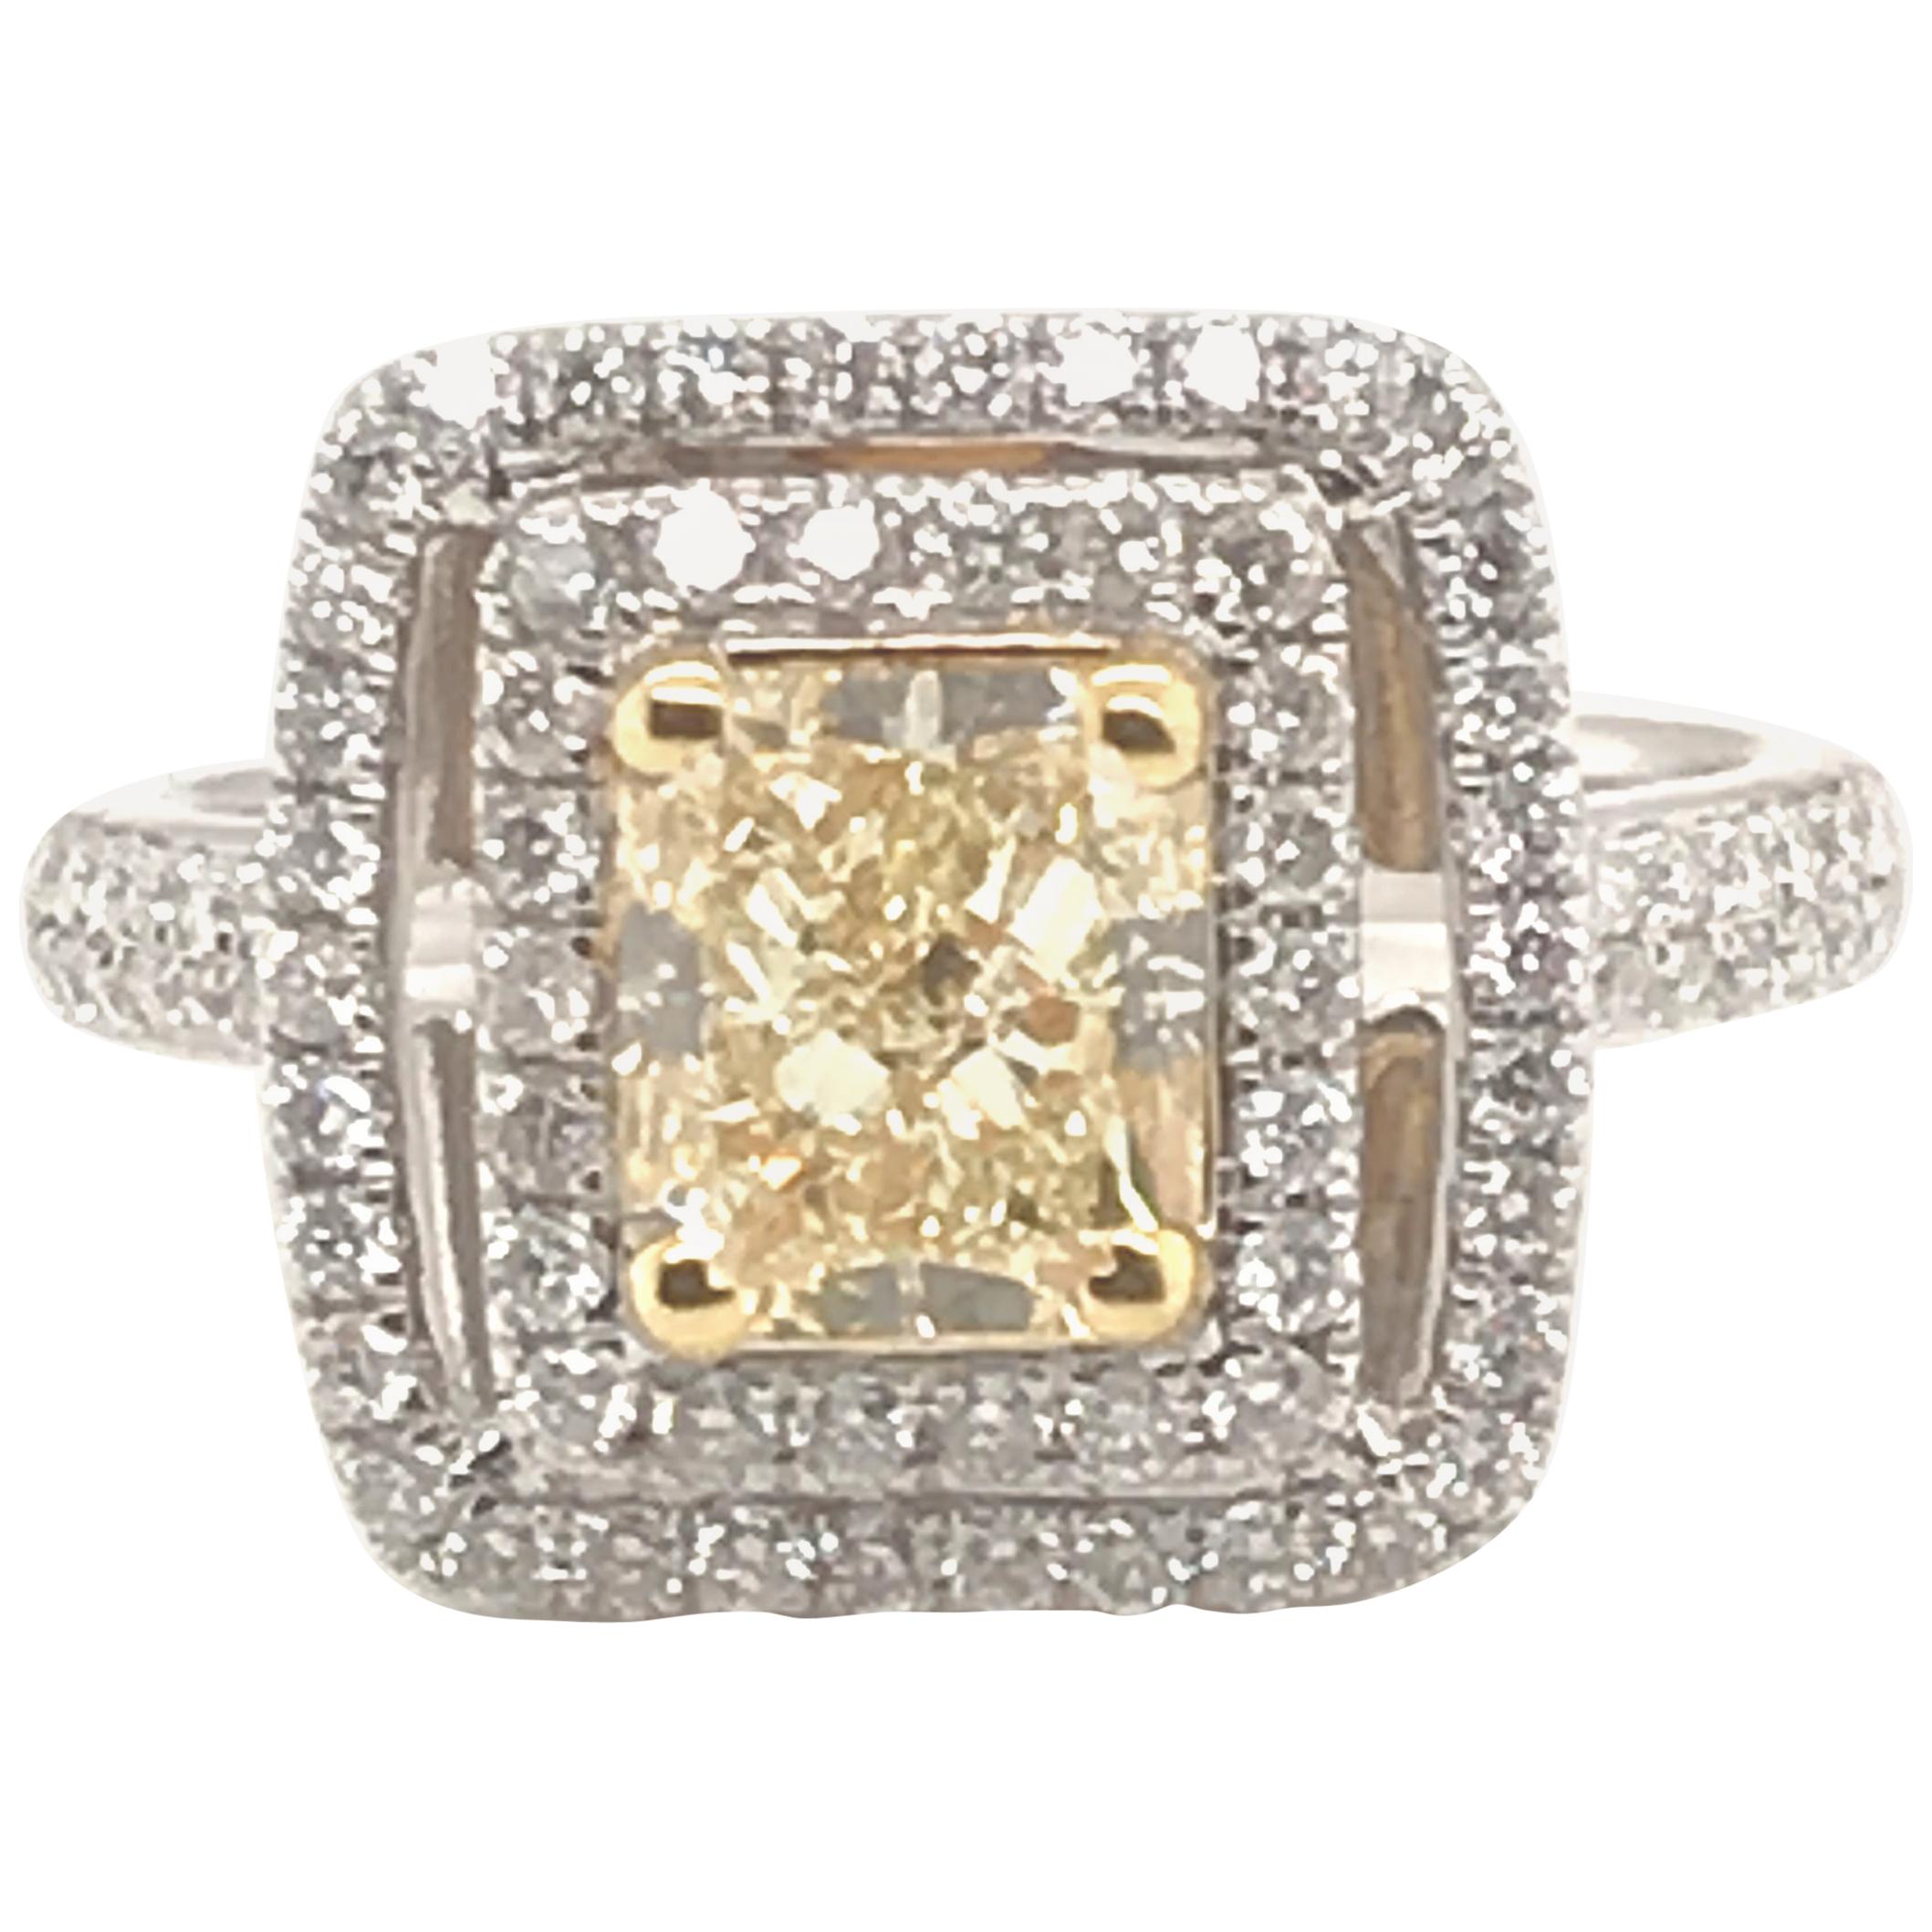 2.11 Carat Natural Fancy Yellow Diamond Ring with 18 Karat White and Yellow Gold For Sale